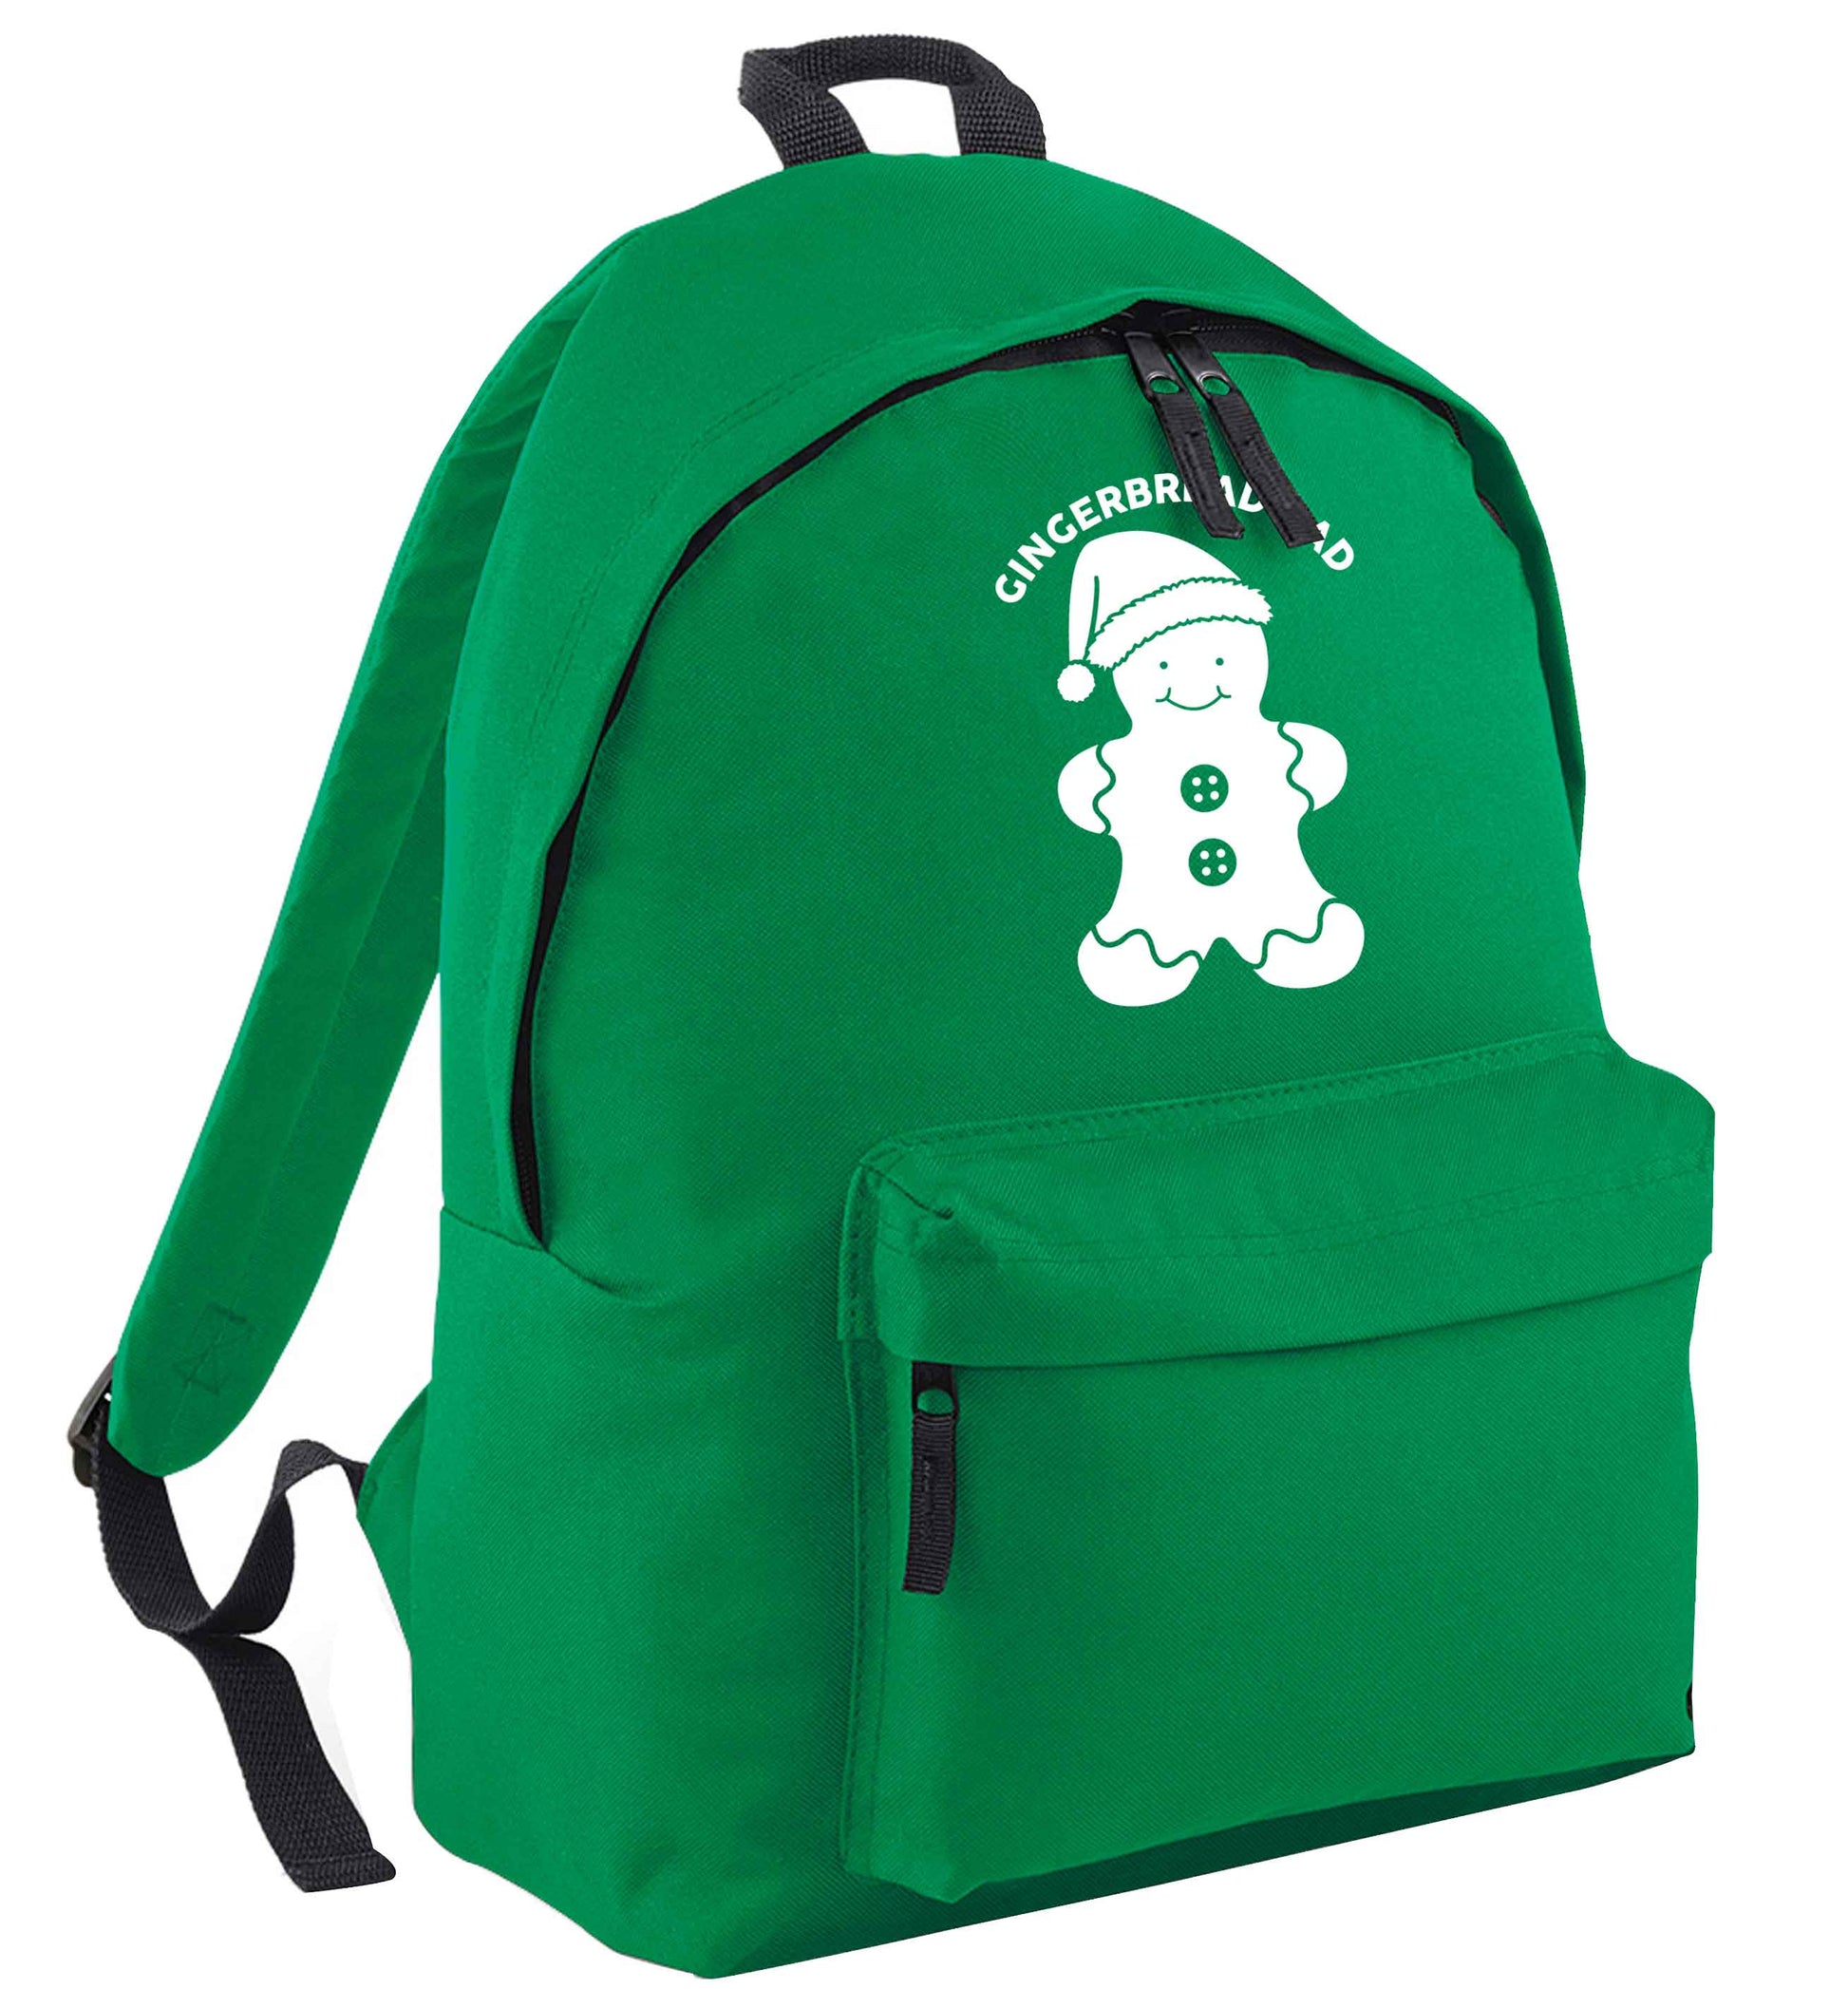 Merry Christmas green adults backpack